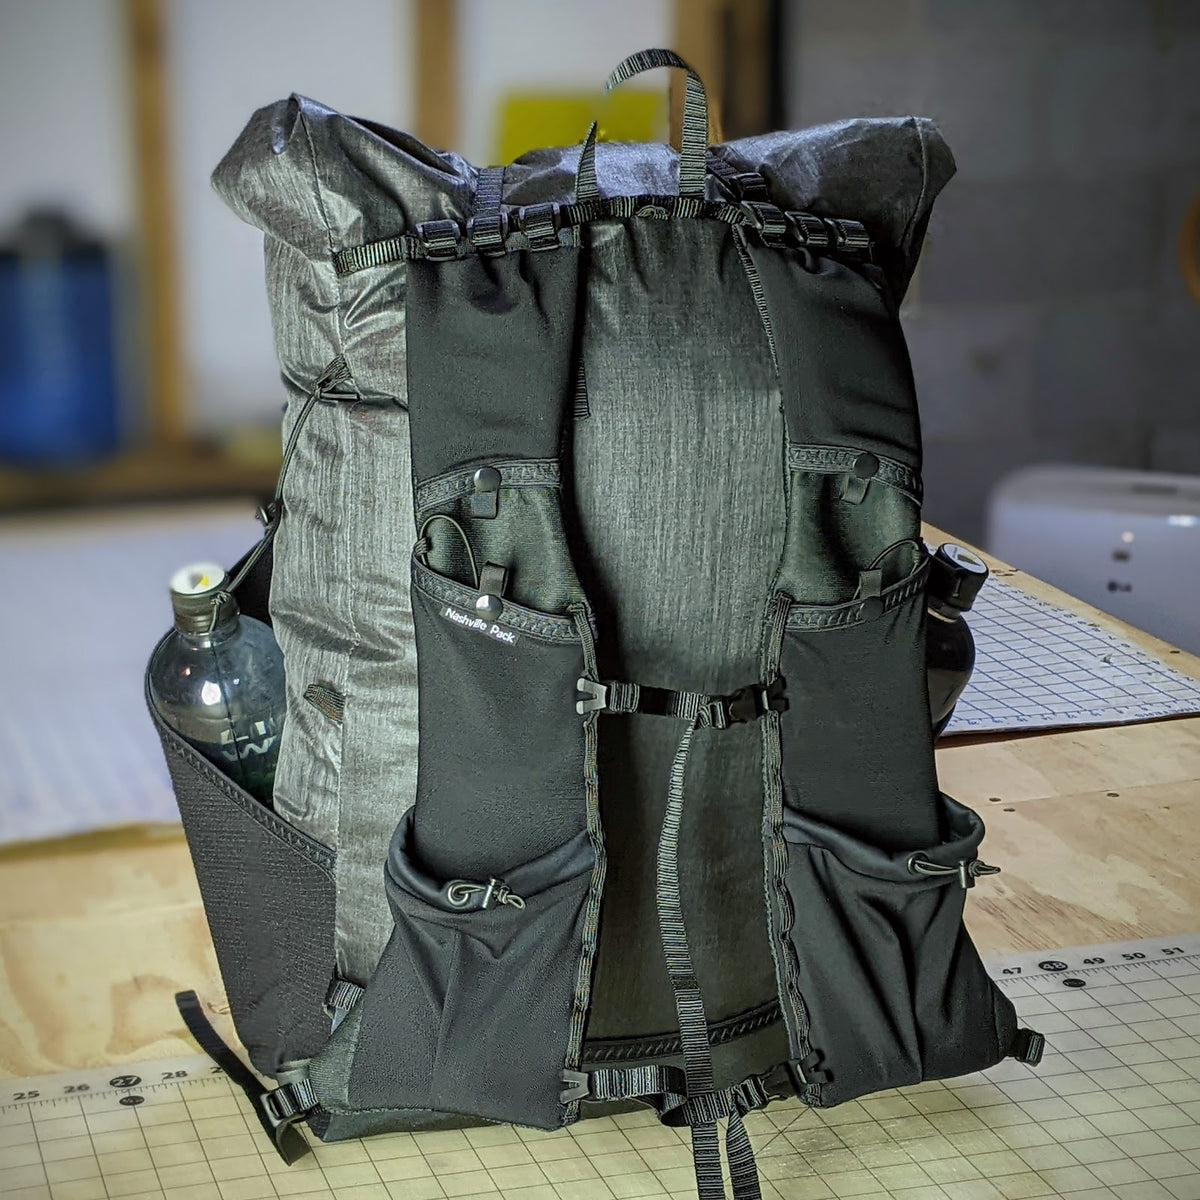 Nashville Pack modular strap system - How does is it made? Will it fail ...